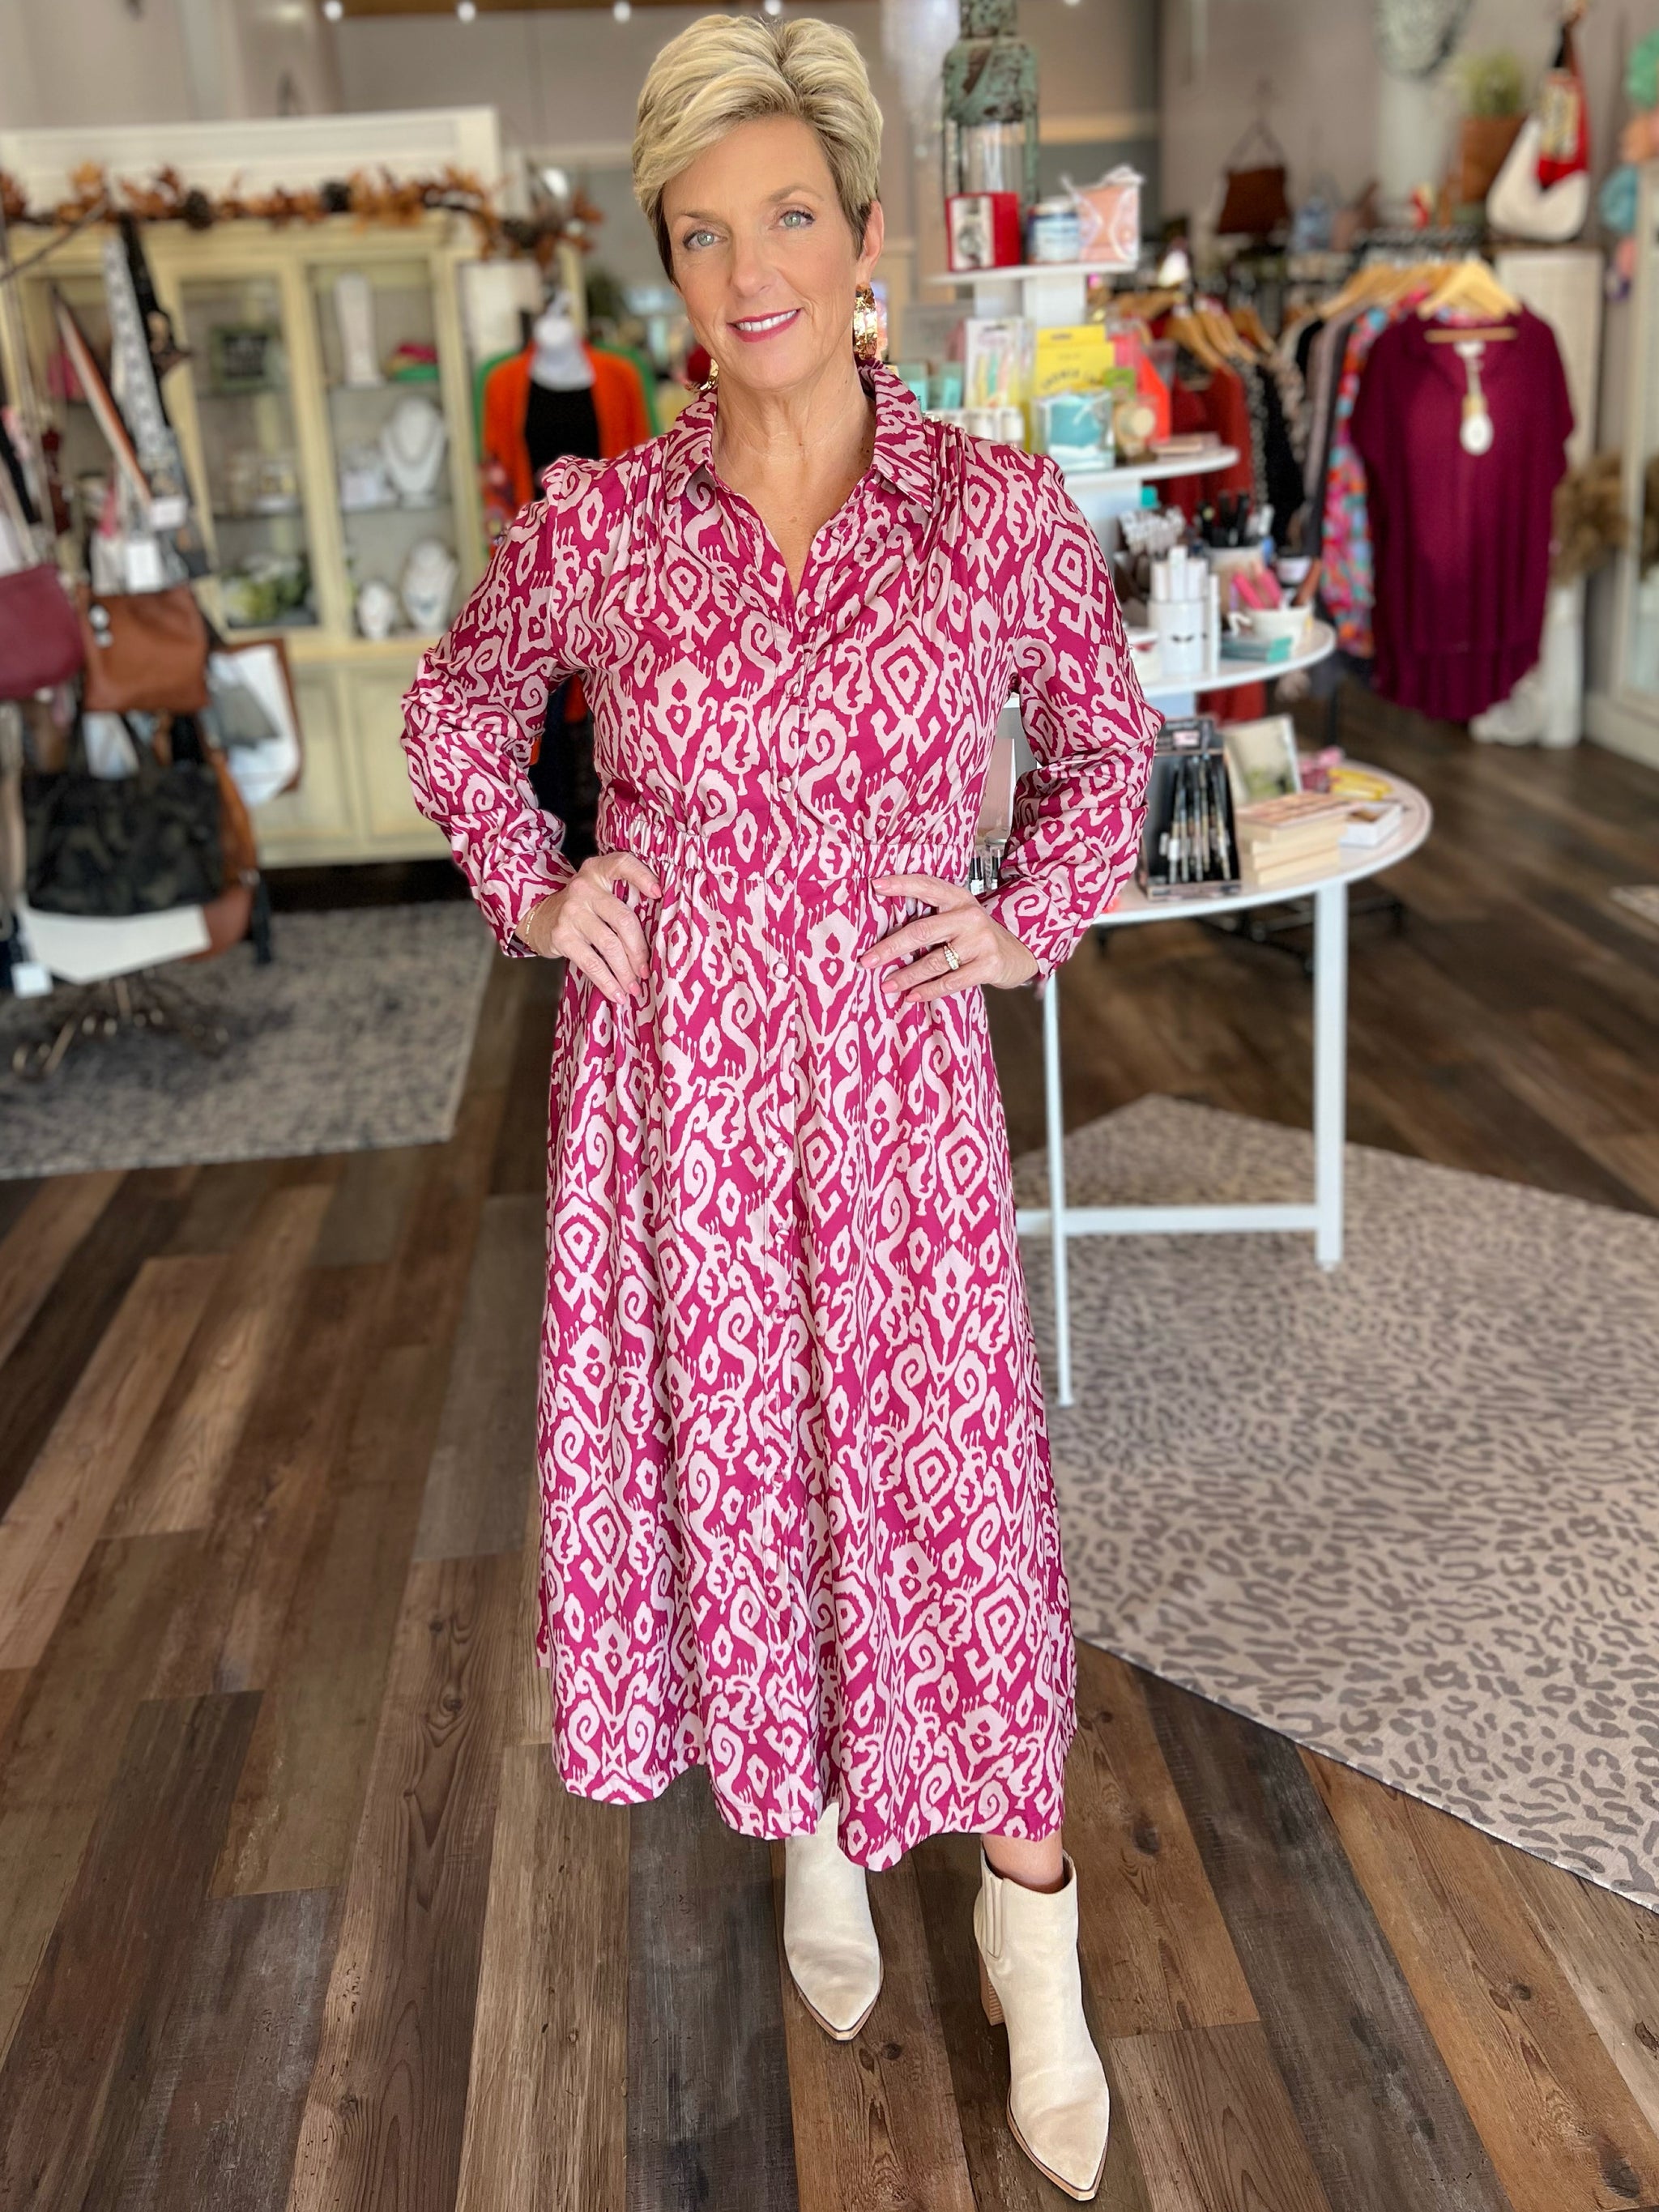 Dresses - Angie's Strength & Style Boutique